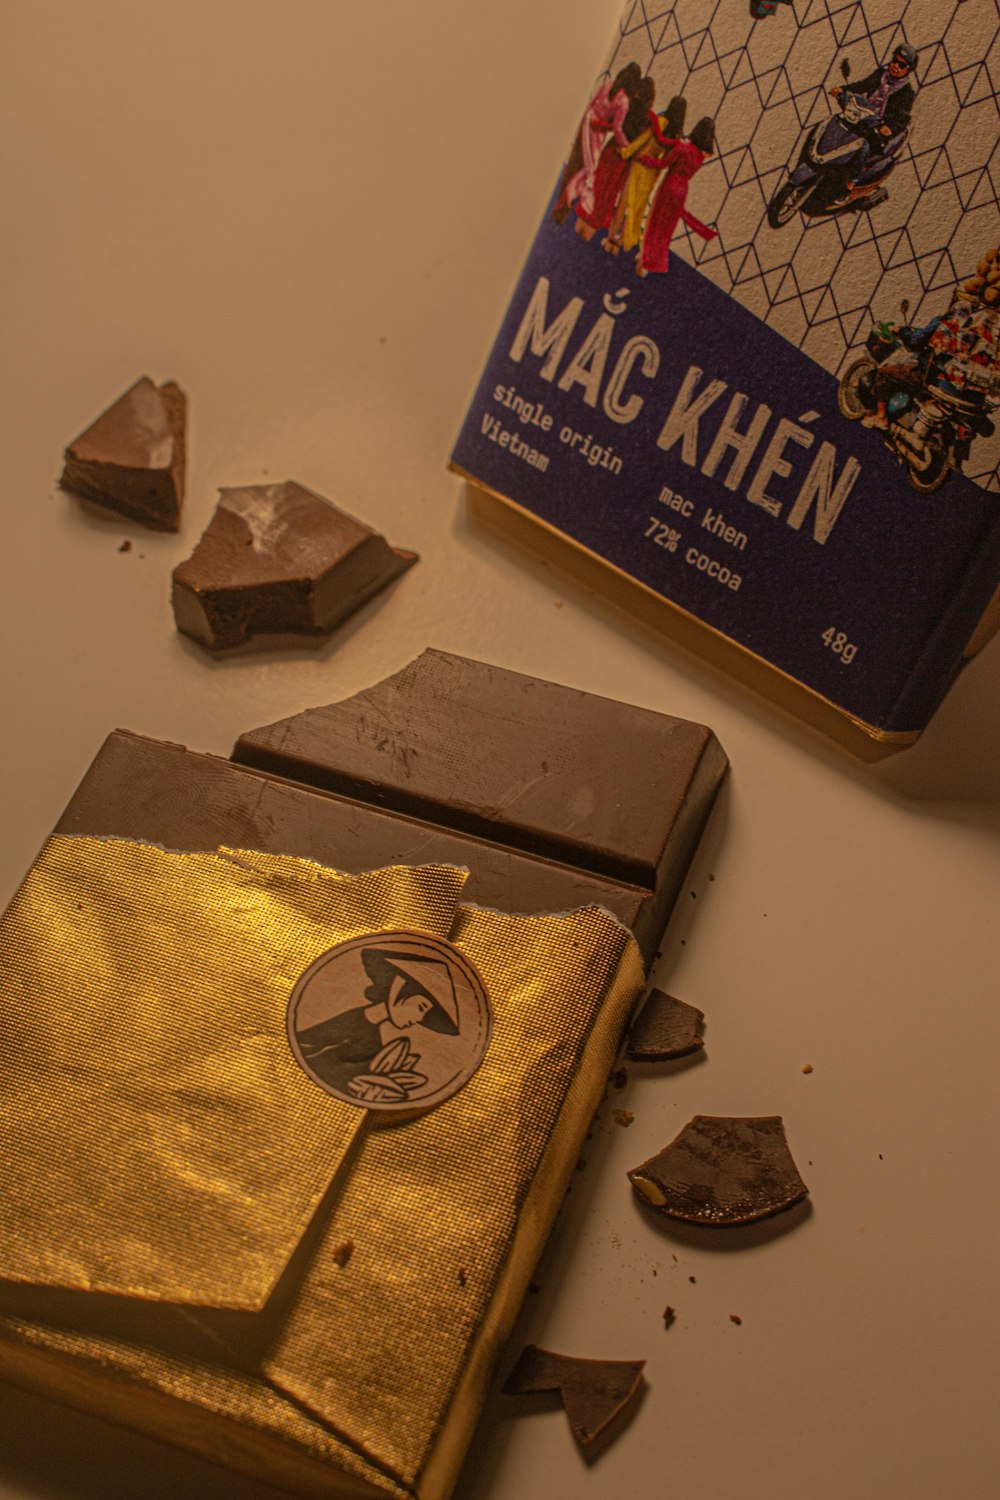 a book and some pieces of chocolate on a table